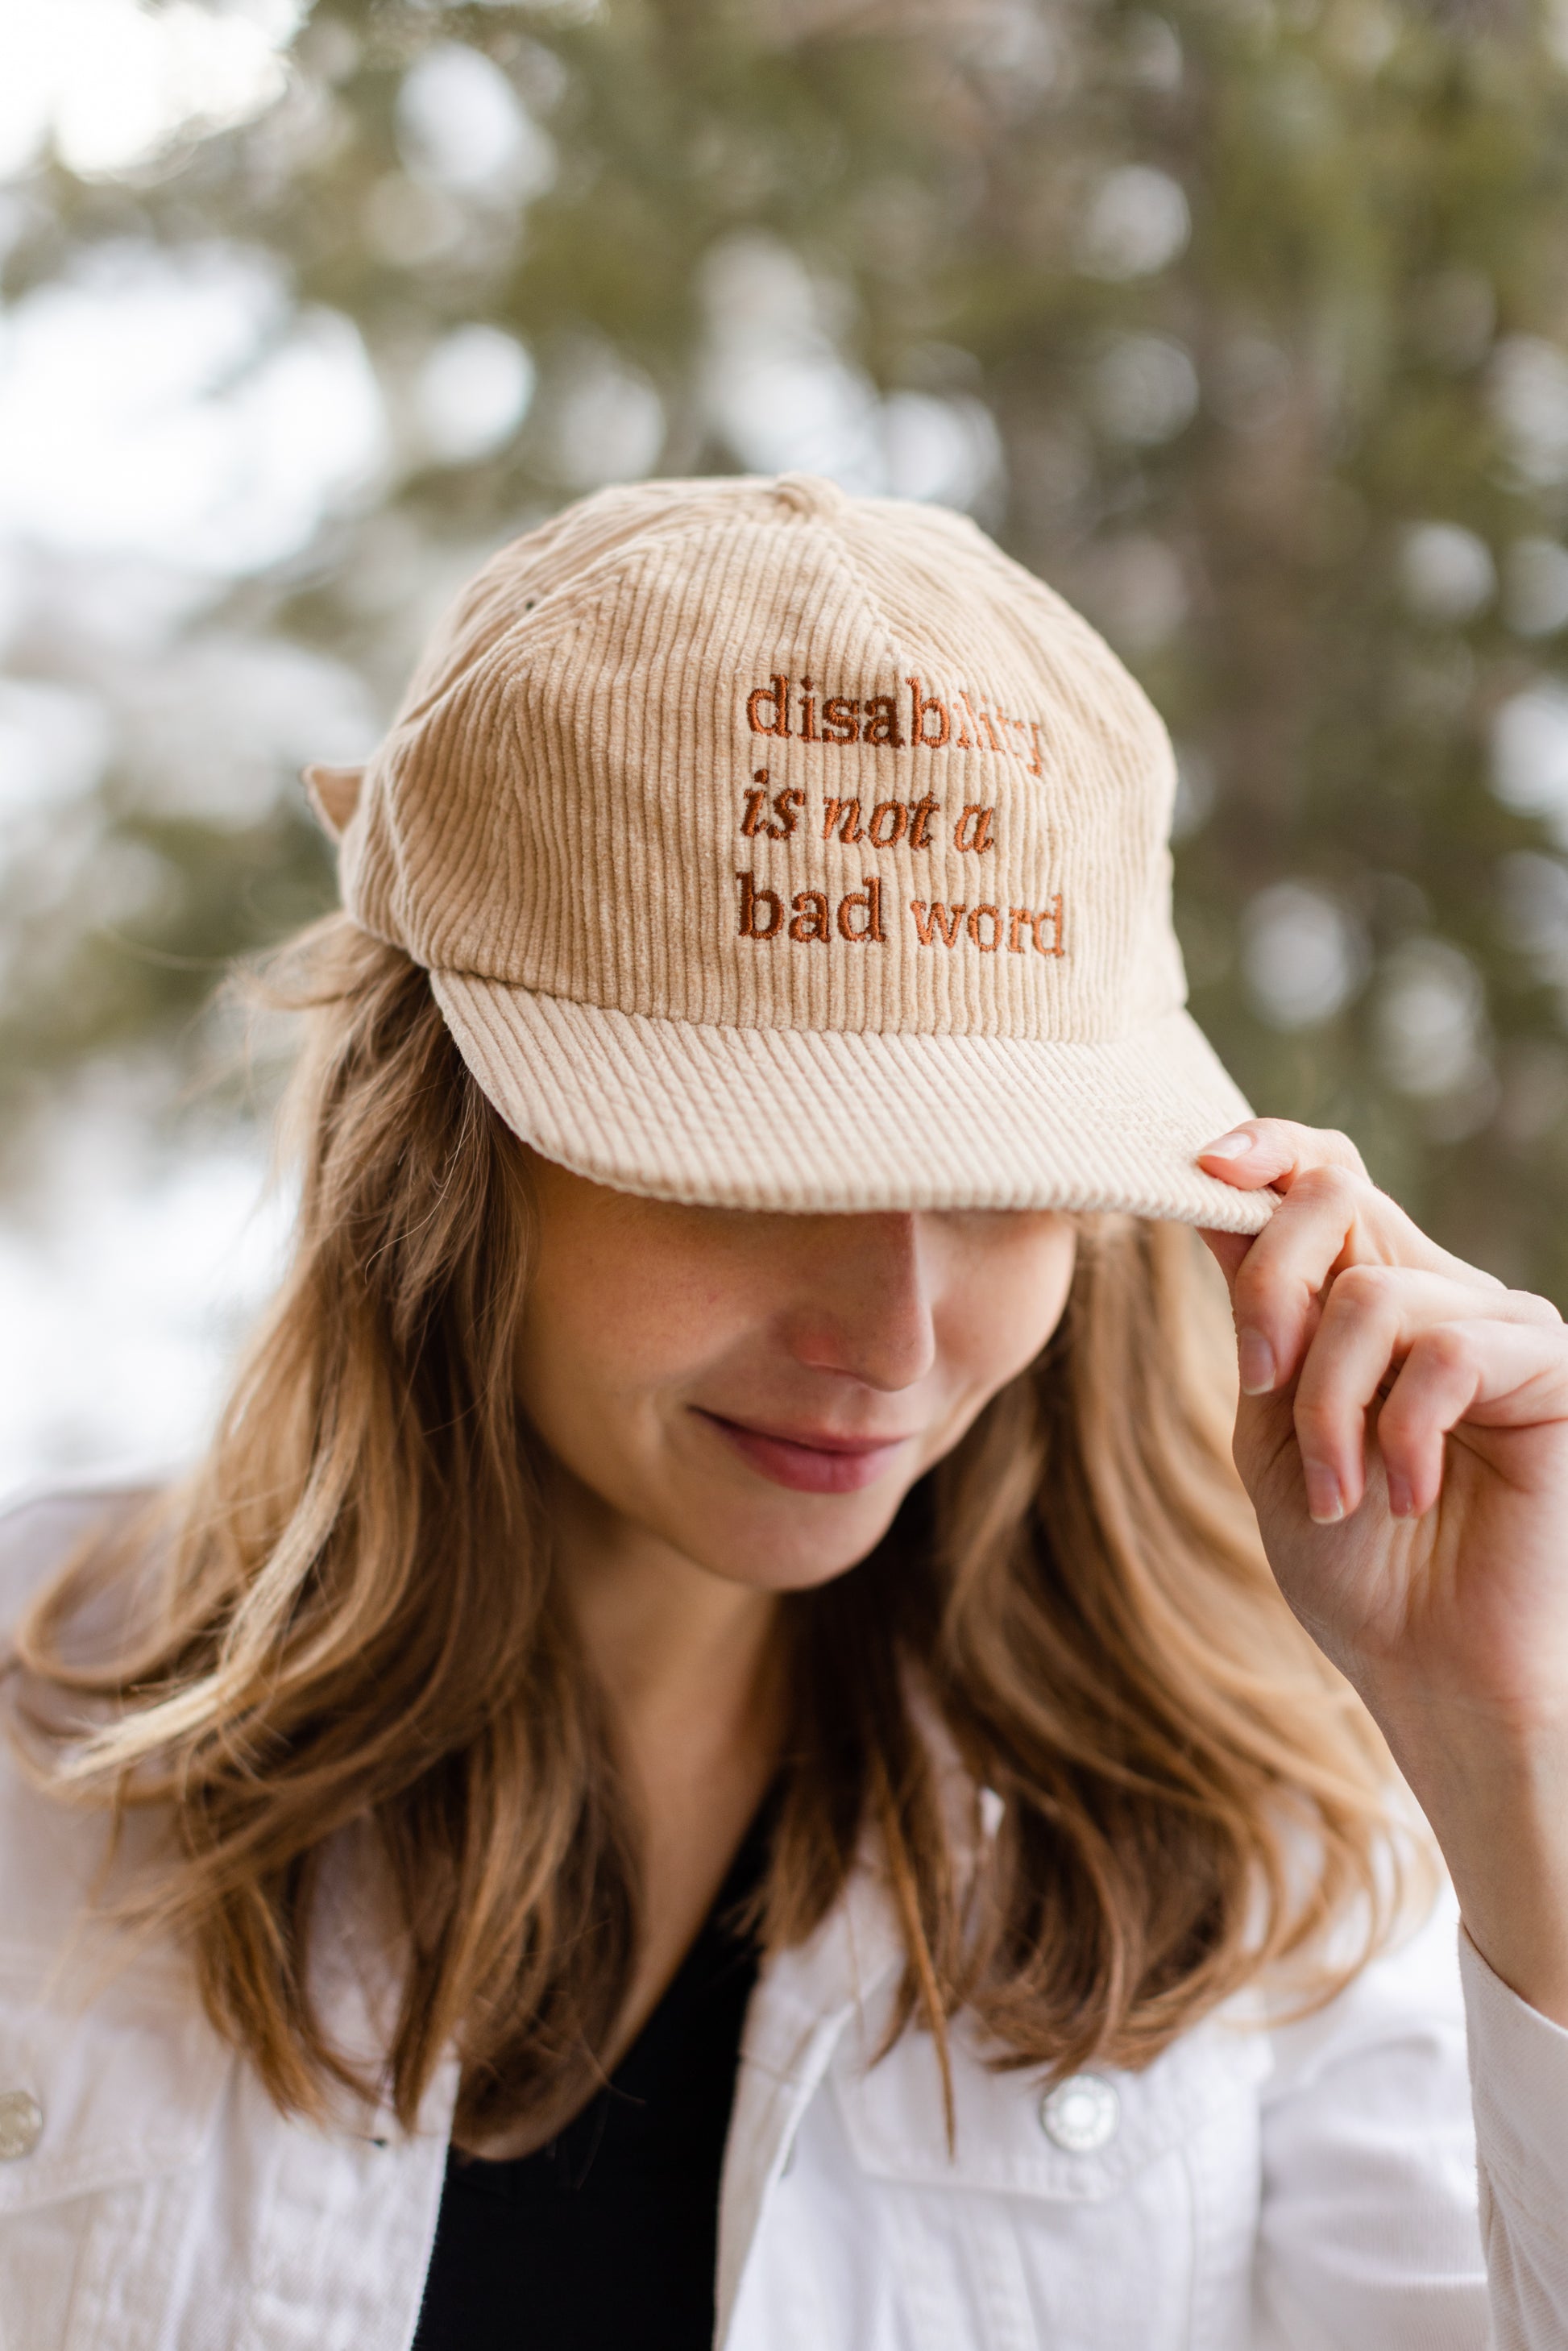 A white woman with long brown hair wears a cream baseball cap with brown text that says "disability is not a bad word."